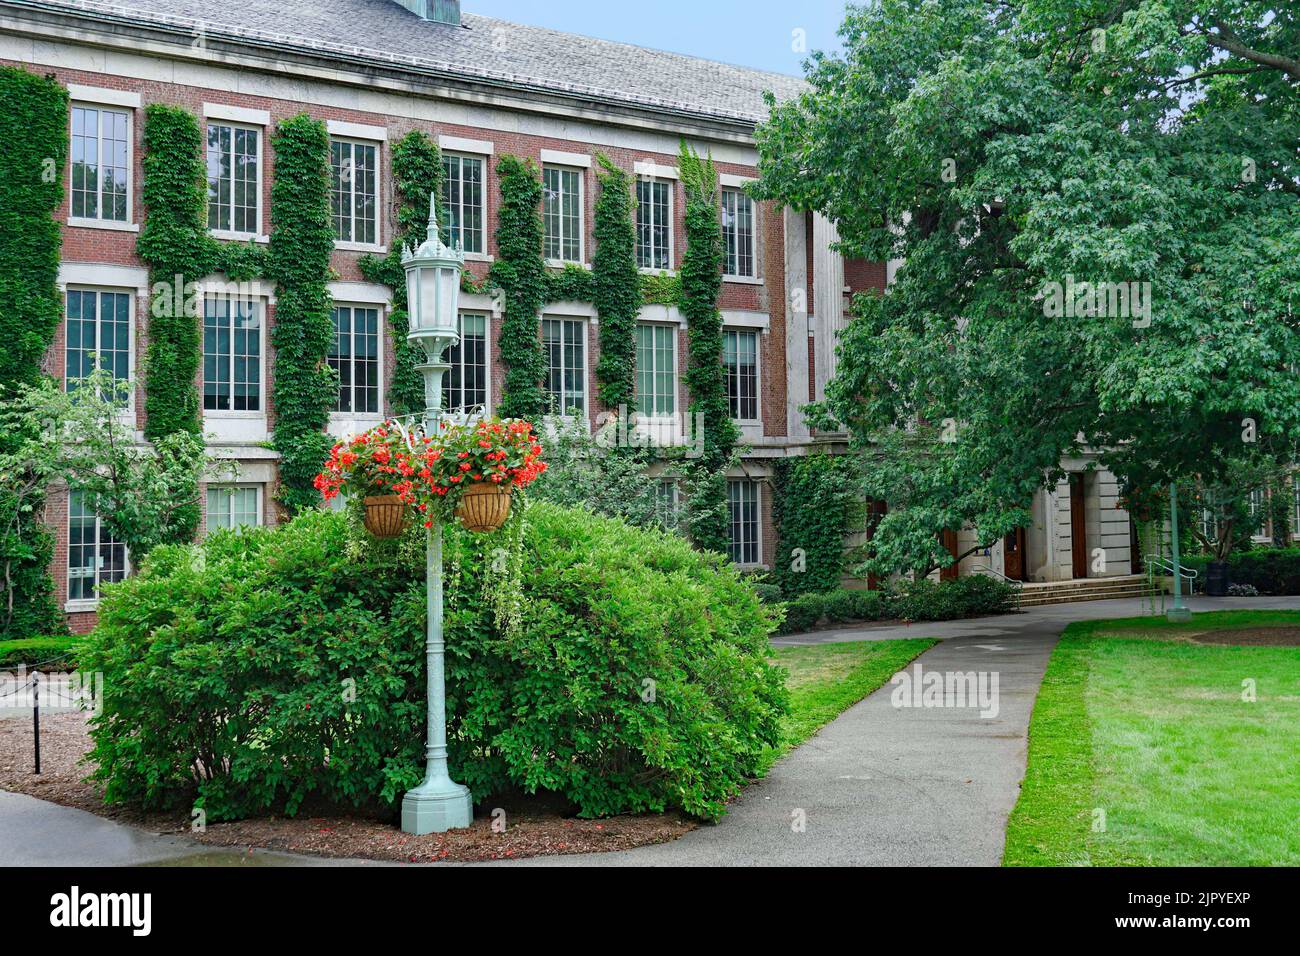 Leafy college campus with ivy covered building Stock Photo